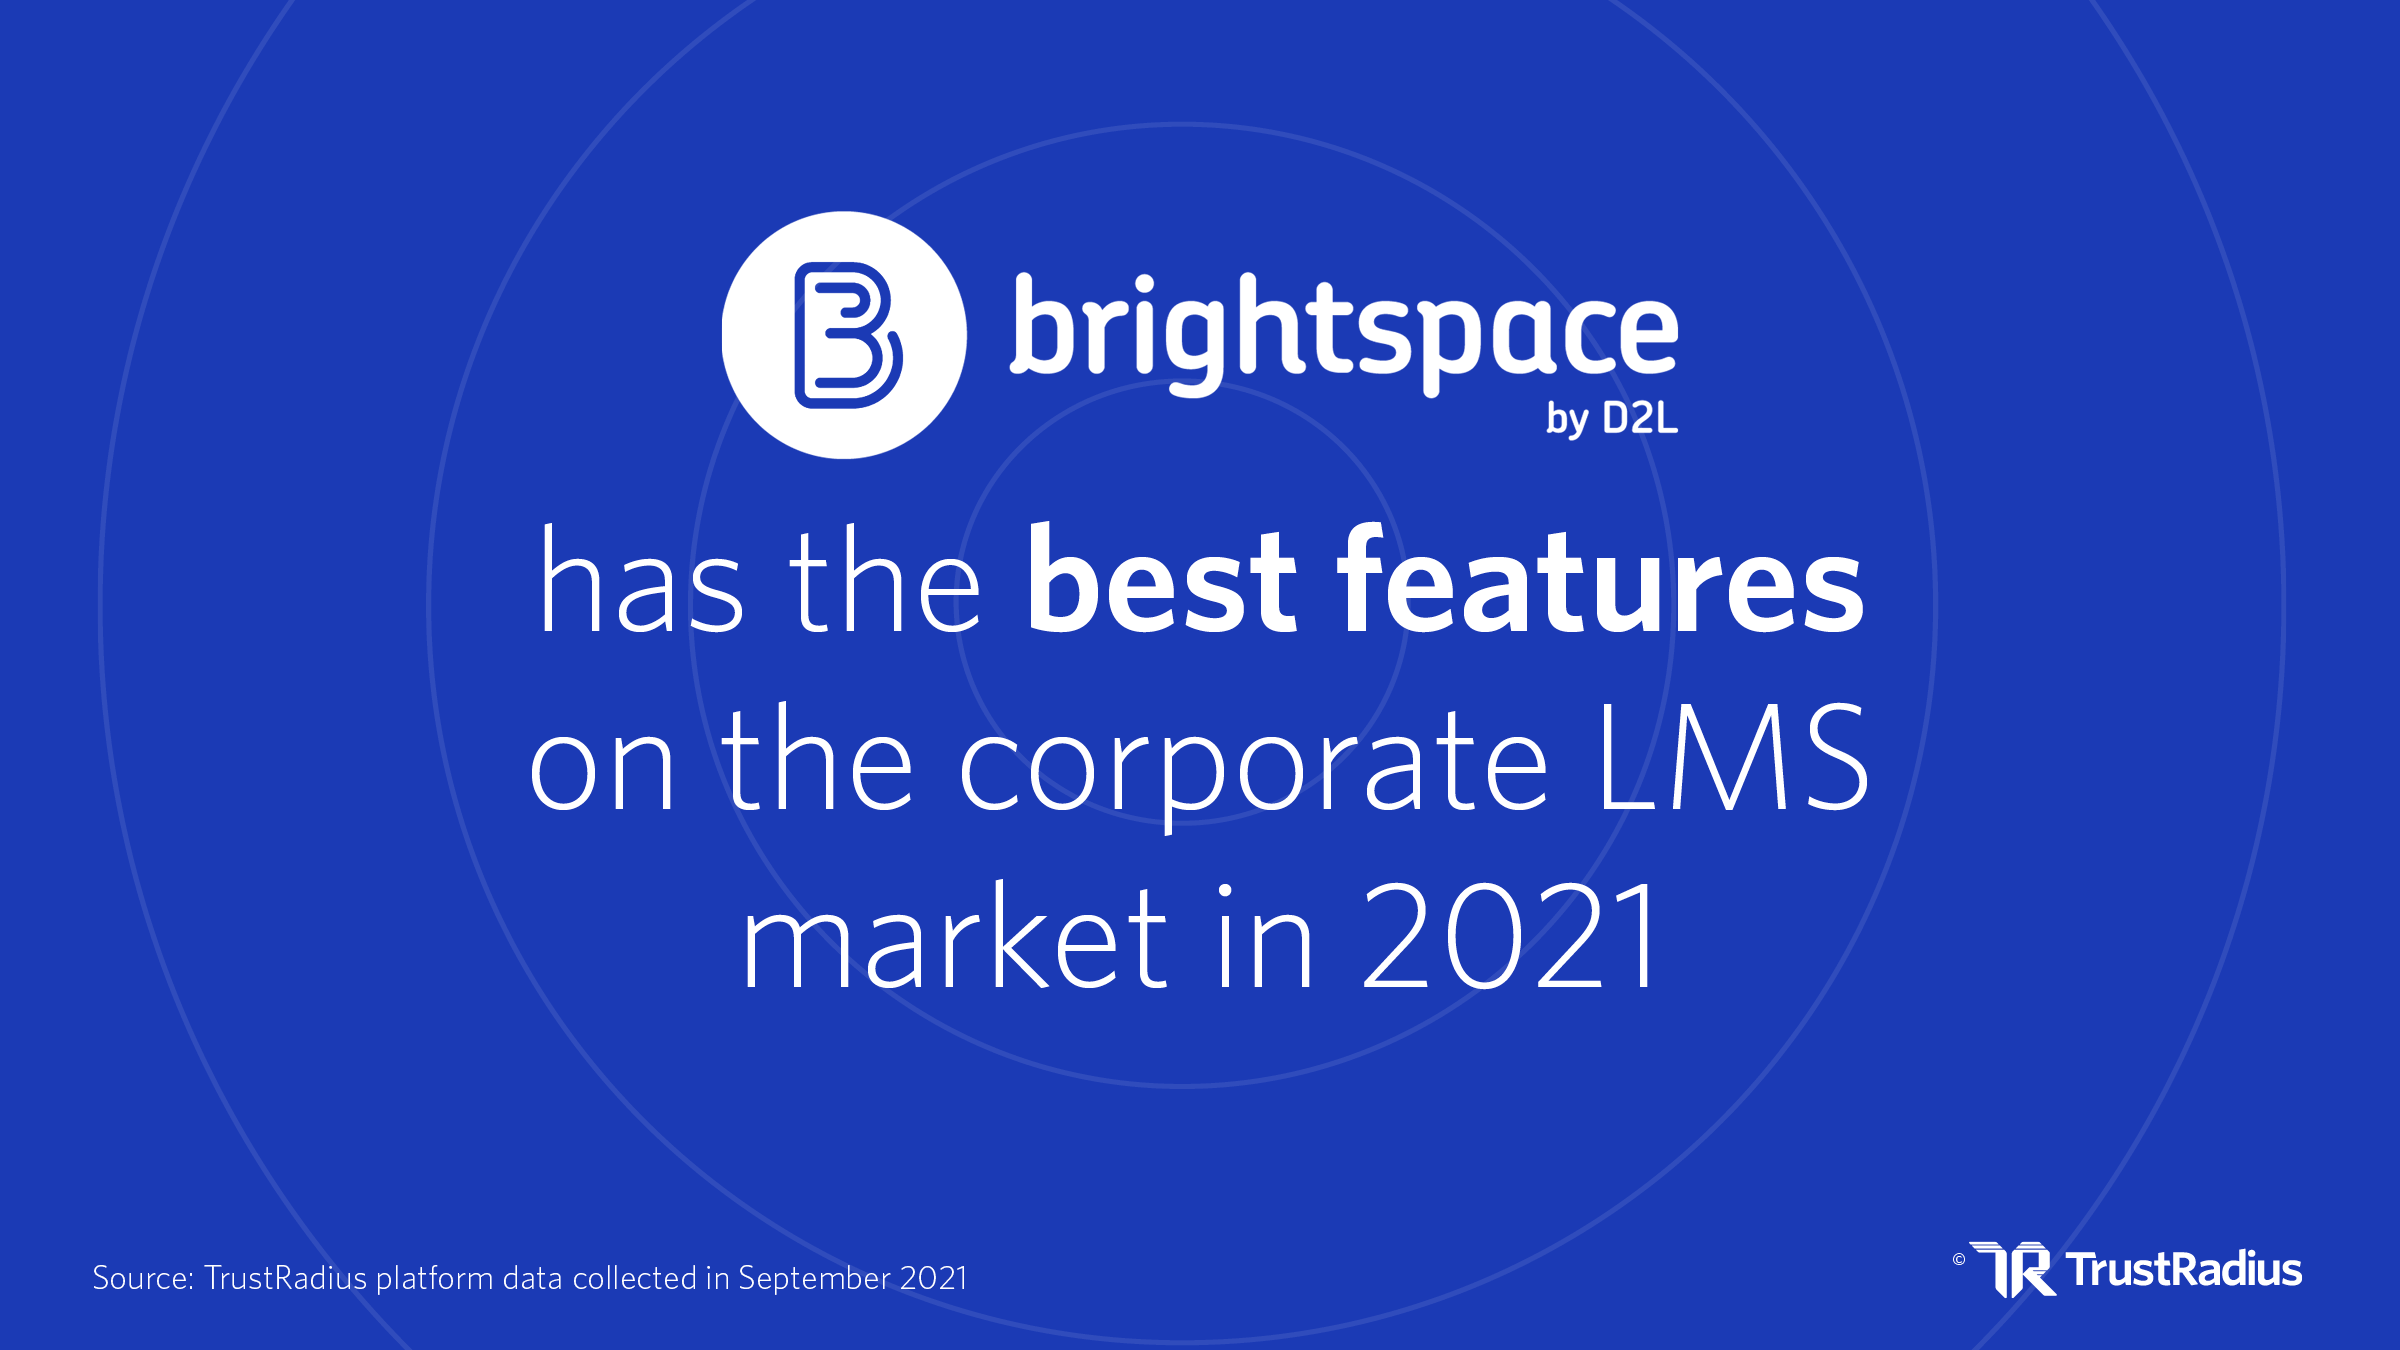 brightspace has the best features on the corporate lms market in 2021